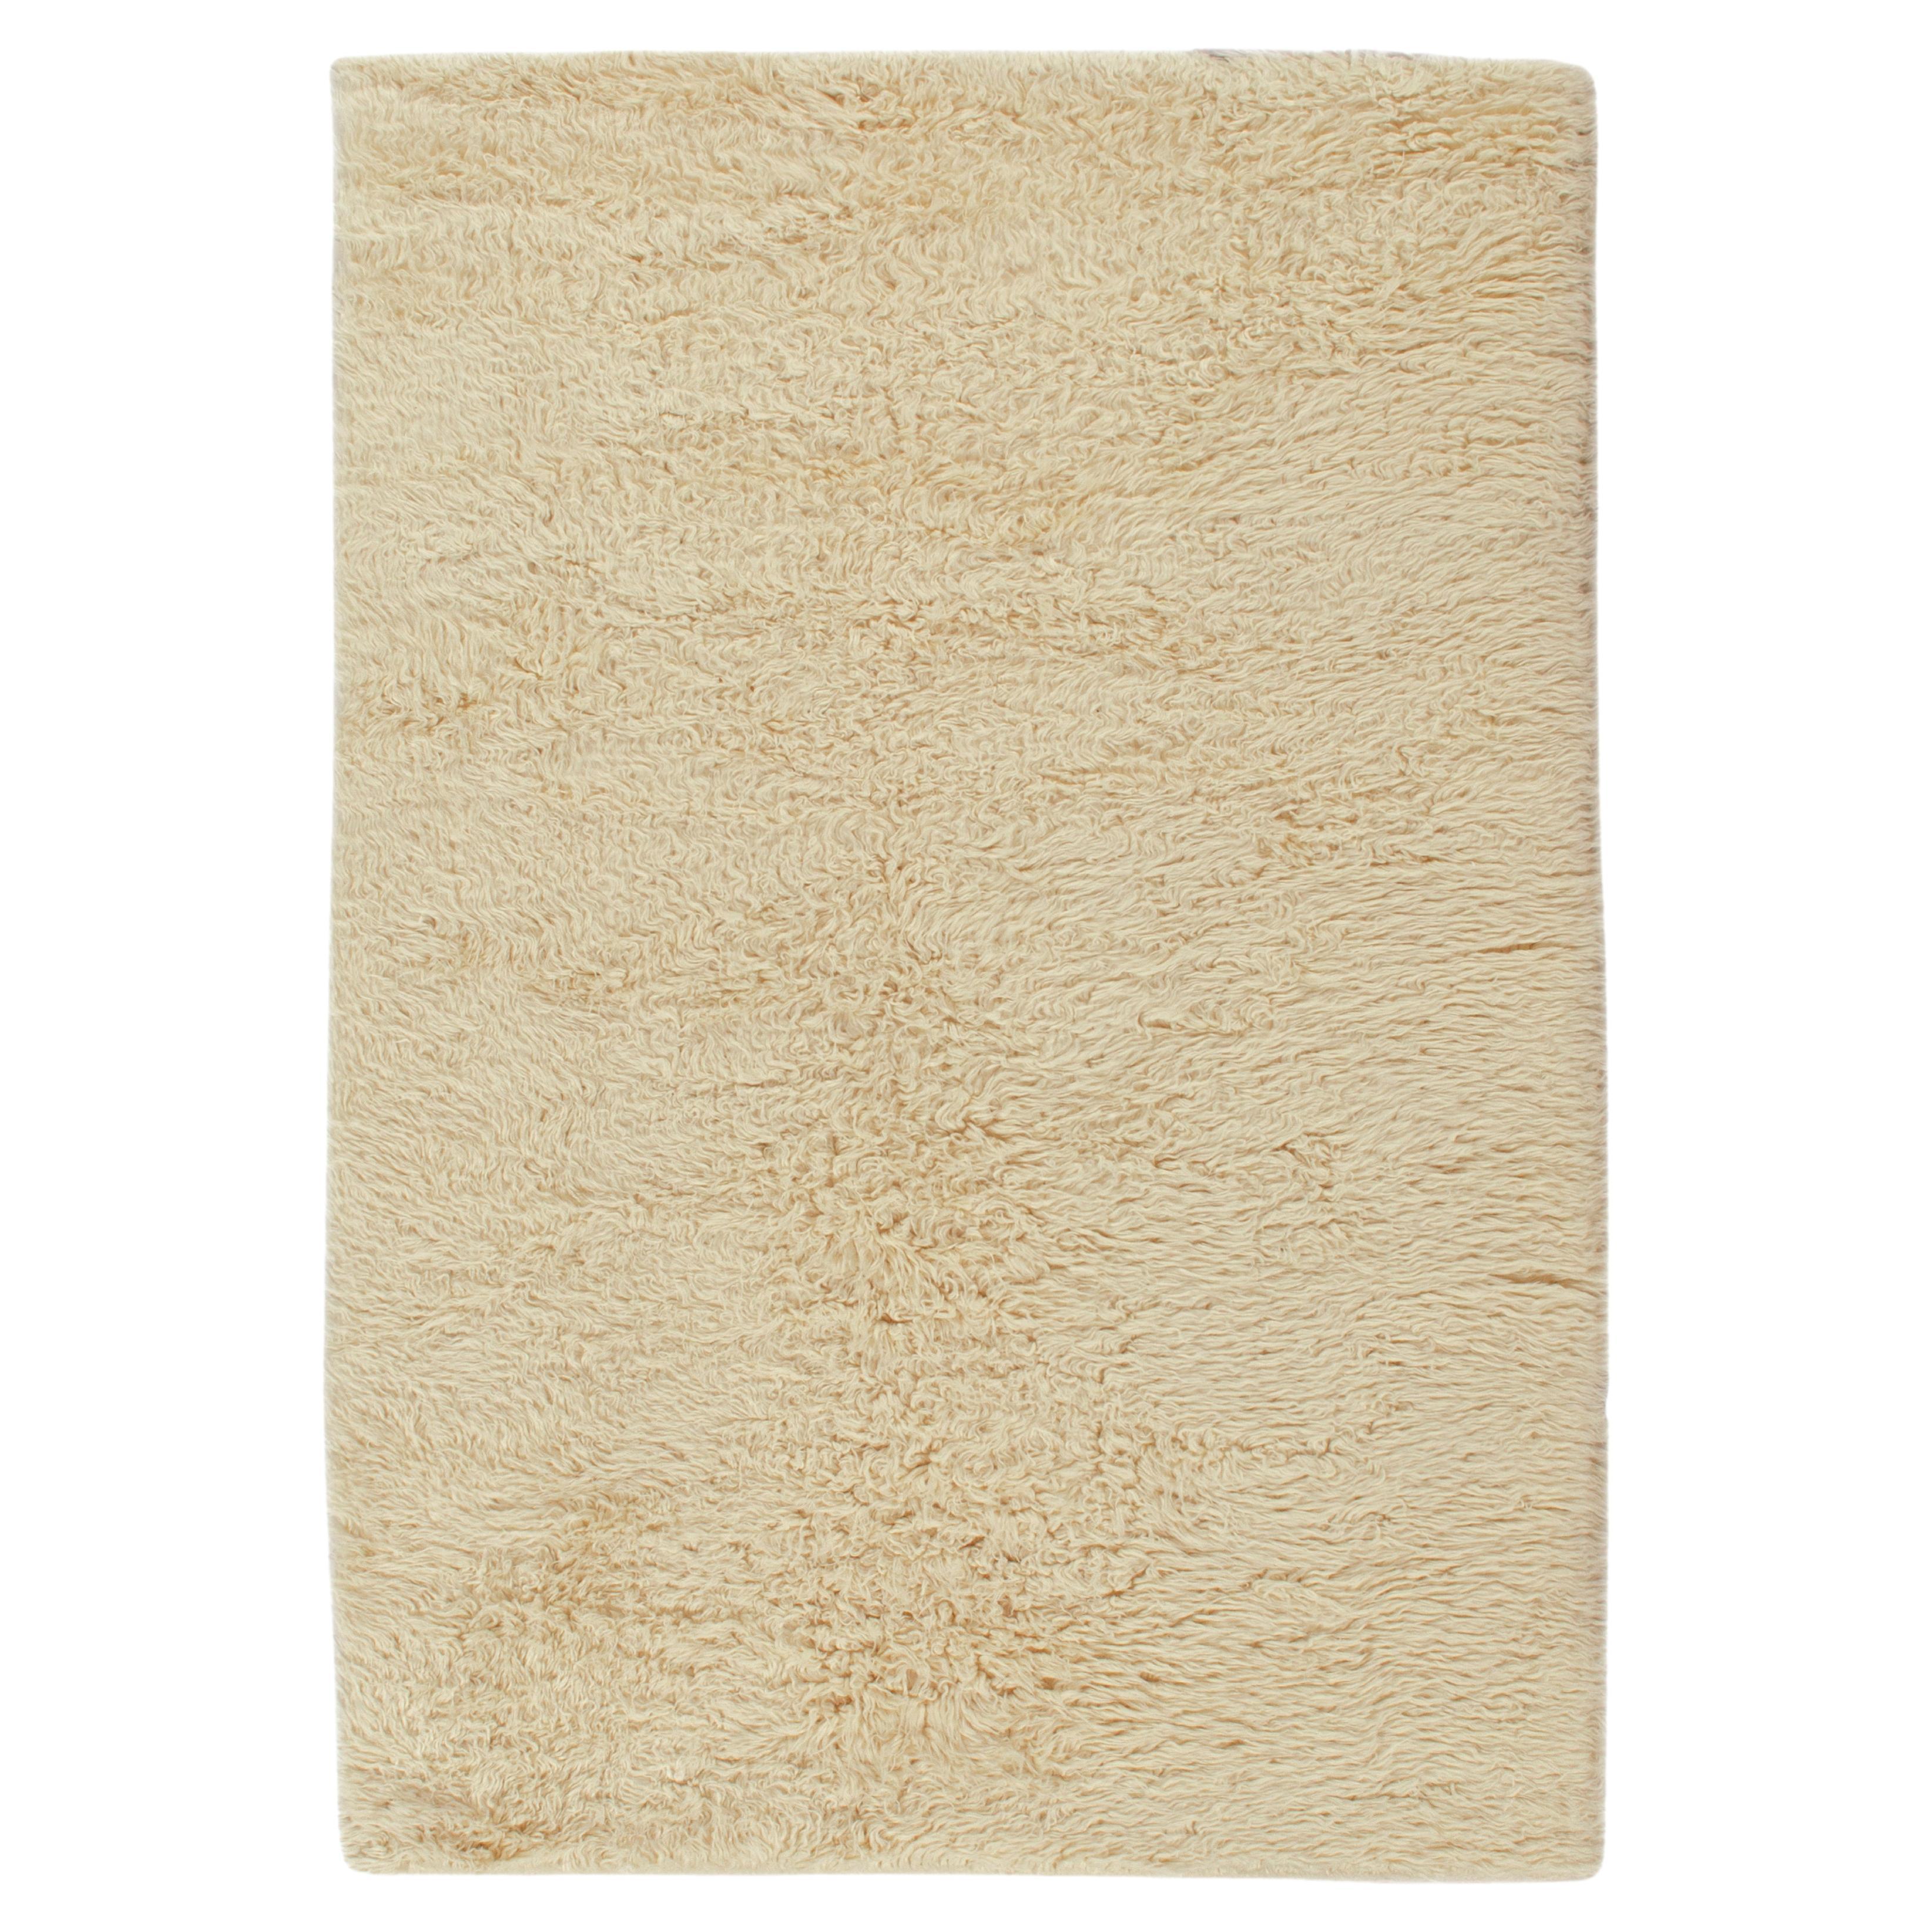 Rug & Kilim’s Moroccan Style Contemporary Rug in Solid Off-White Shag Pile For Sale